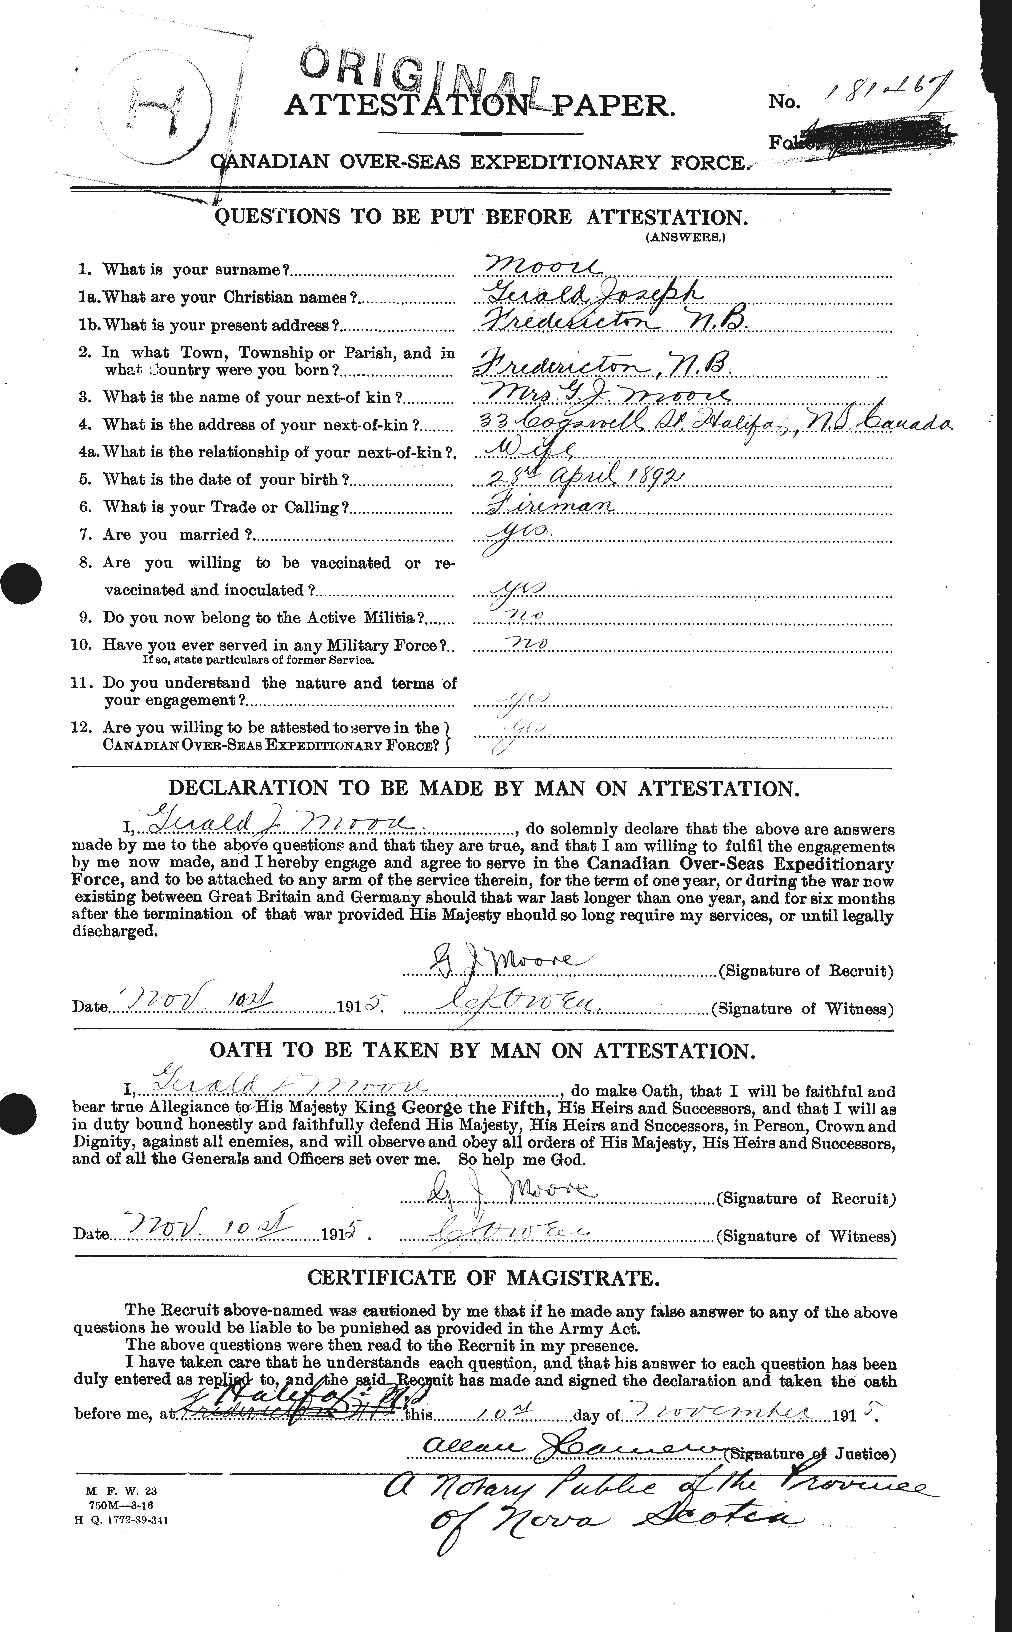 Personnel Records of the First World War - CEF 502033a